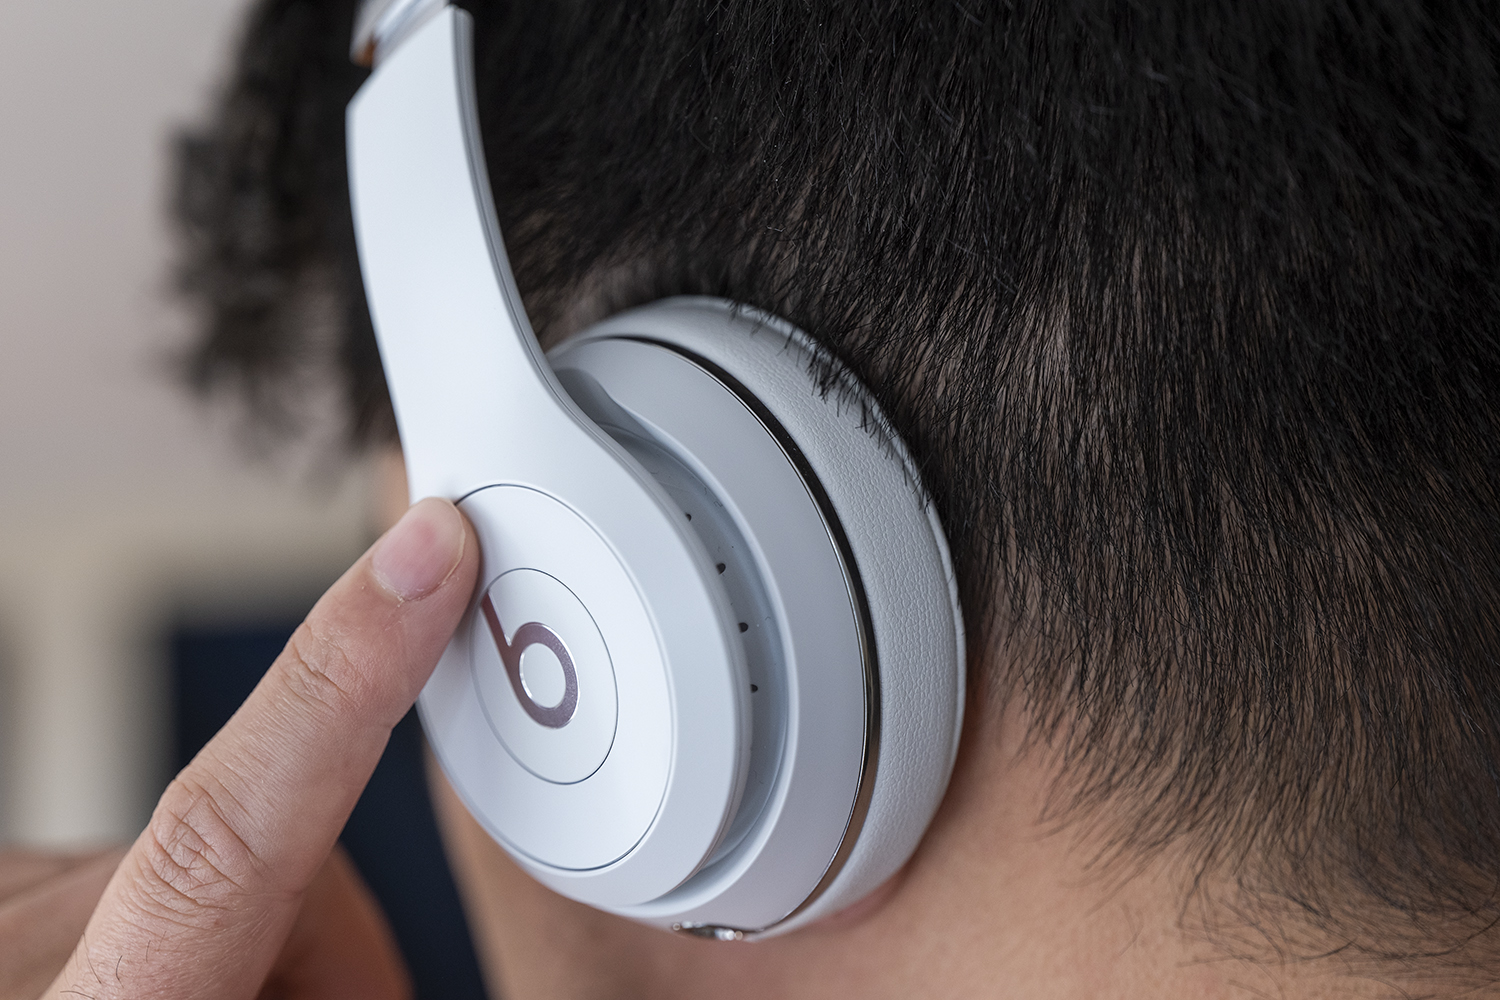 Beats Solo3 Headphones Review: Style The Way |